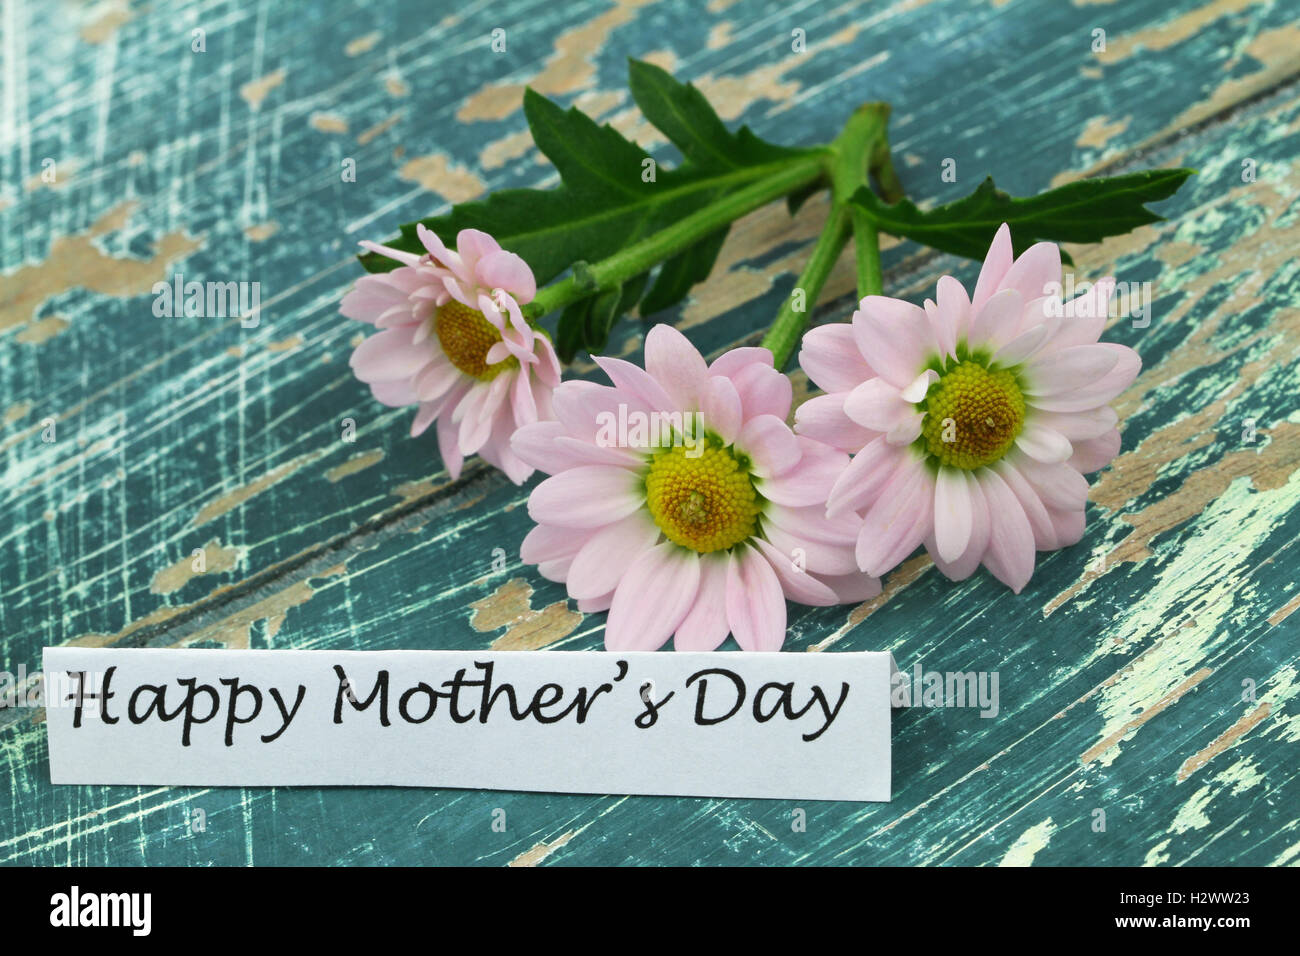 Happy Mother's Day card with pink daisy flowers on rustic surface Stock Photo